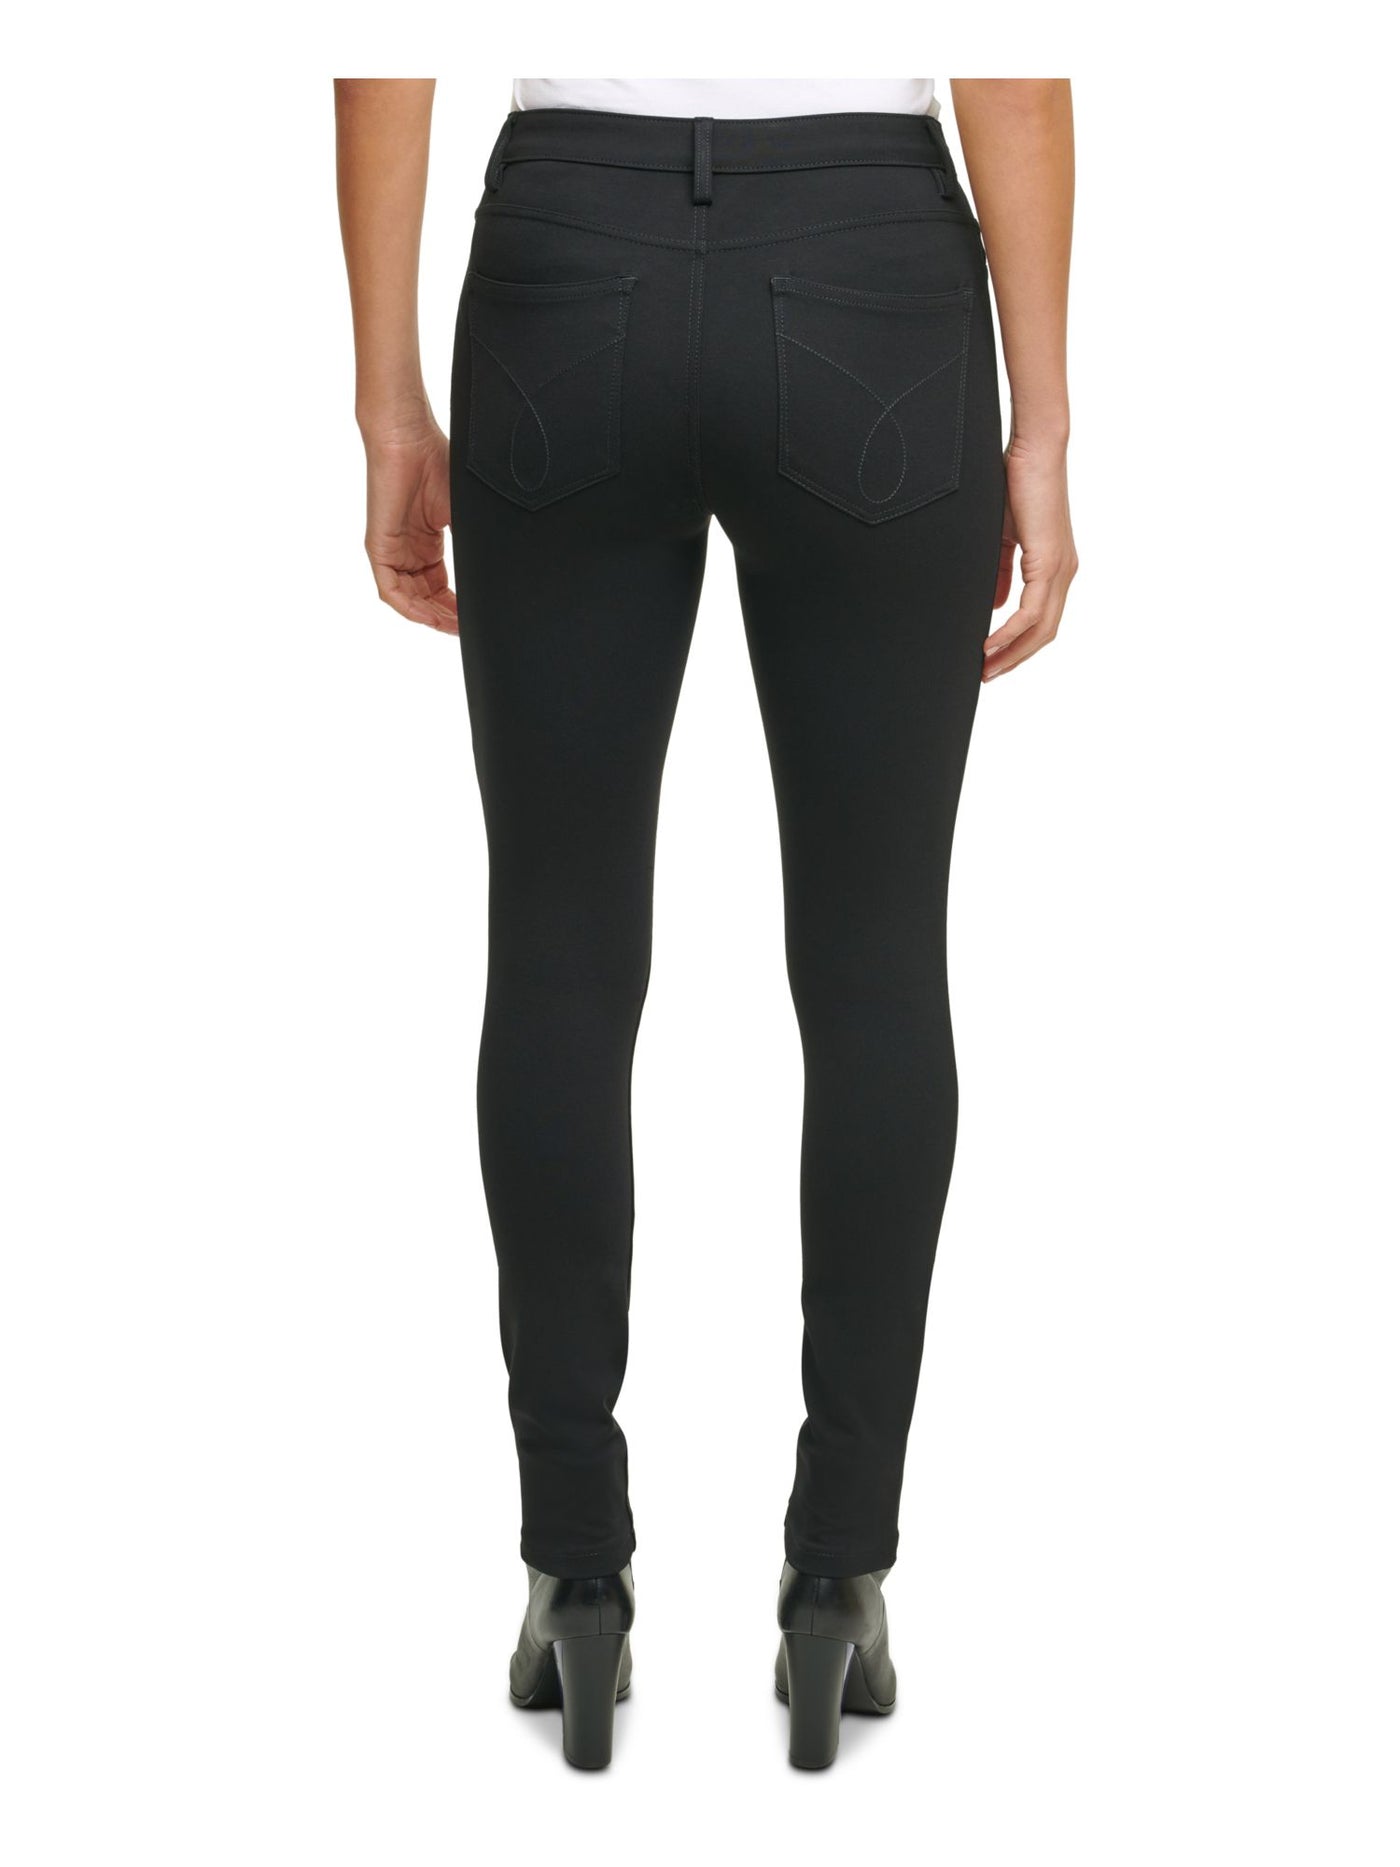 CALVIN KLEIN Womens Black Stretch Zippered Pocketed Pull-on Mid-rise Ponte Skinny Leggings 2